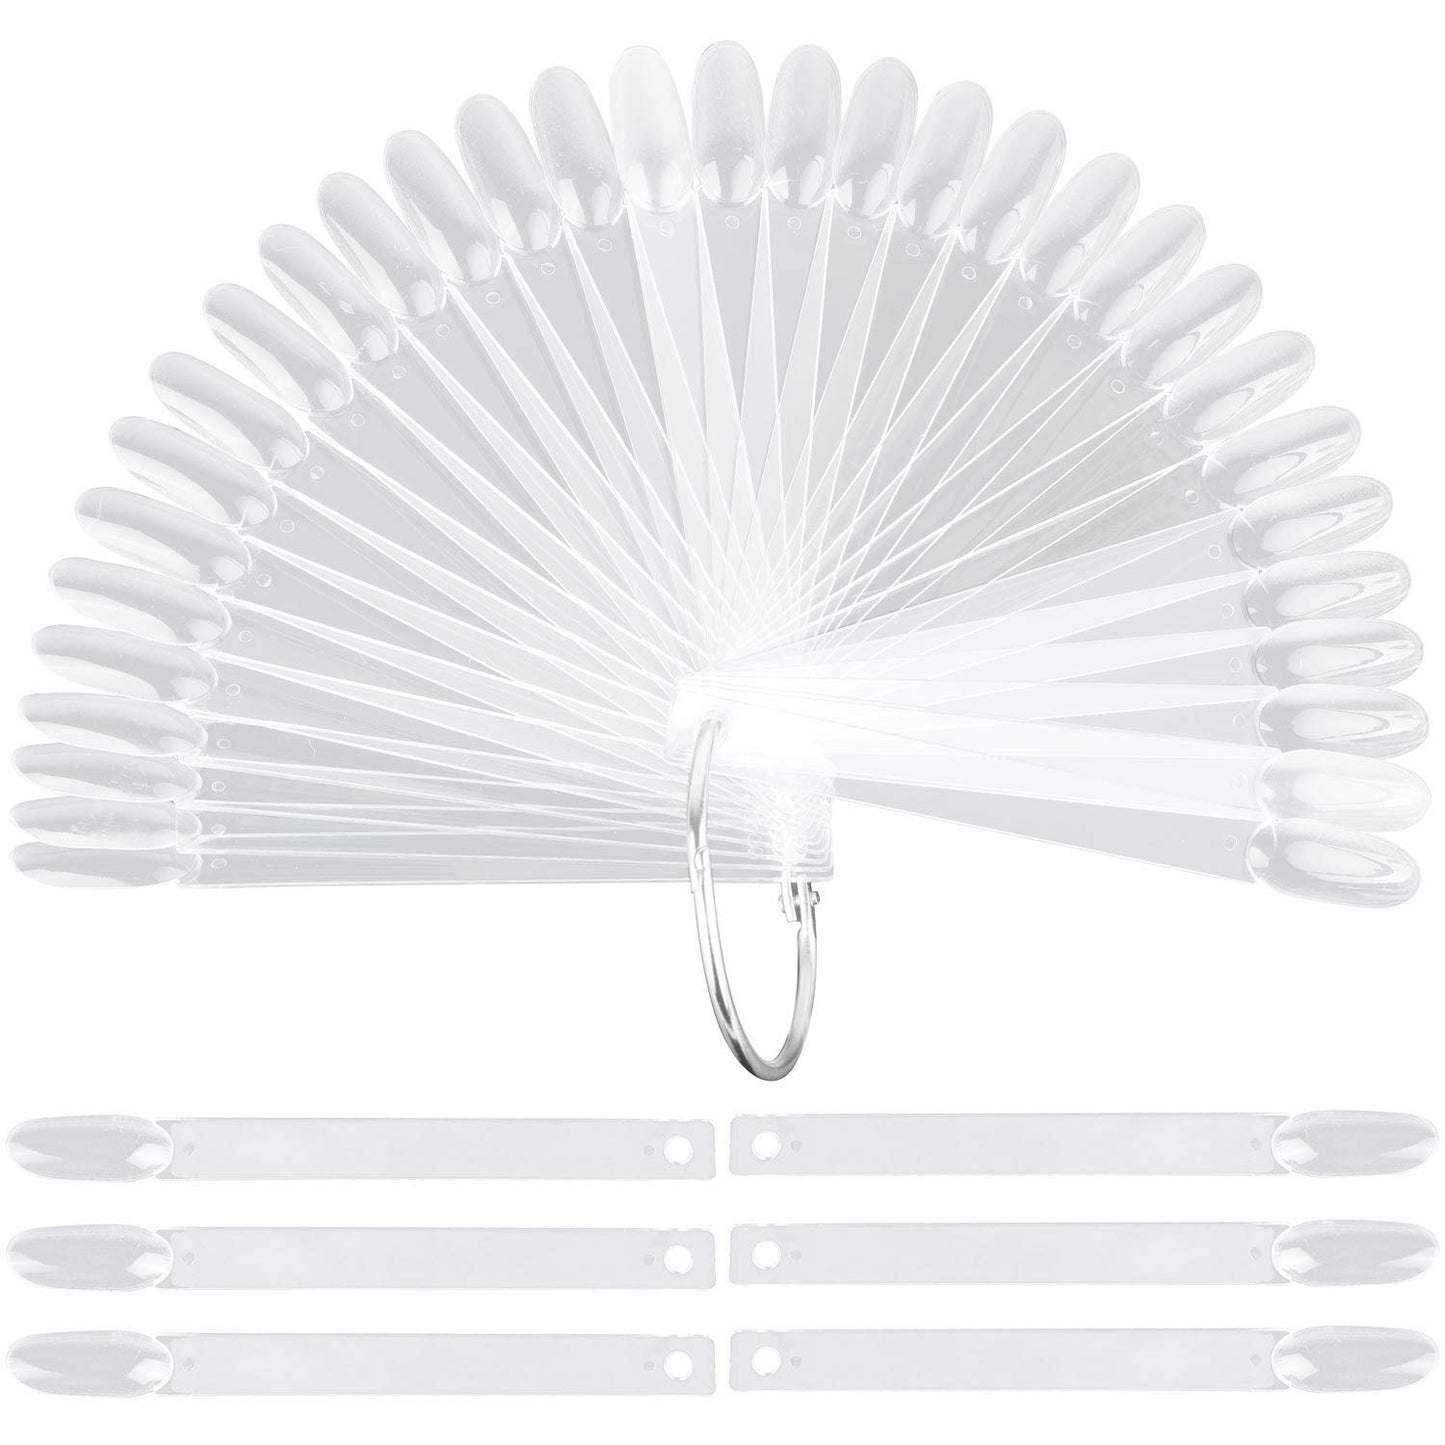 200 Pcs Oval Nail Polish Sample Sticks Fan-shaped Finger Nail Color Display Swatches with Metal Split Ring, Clear